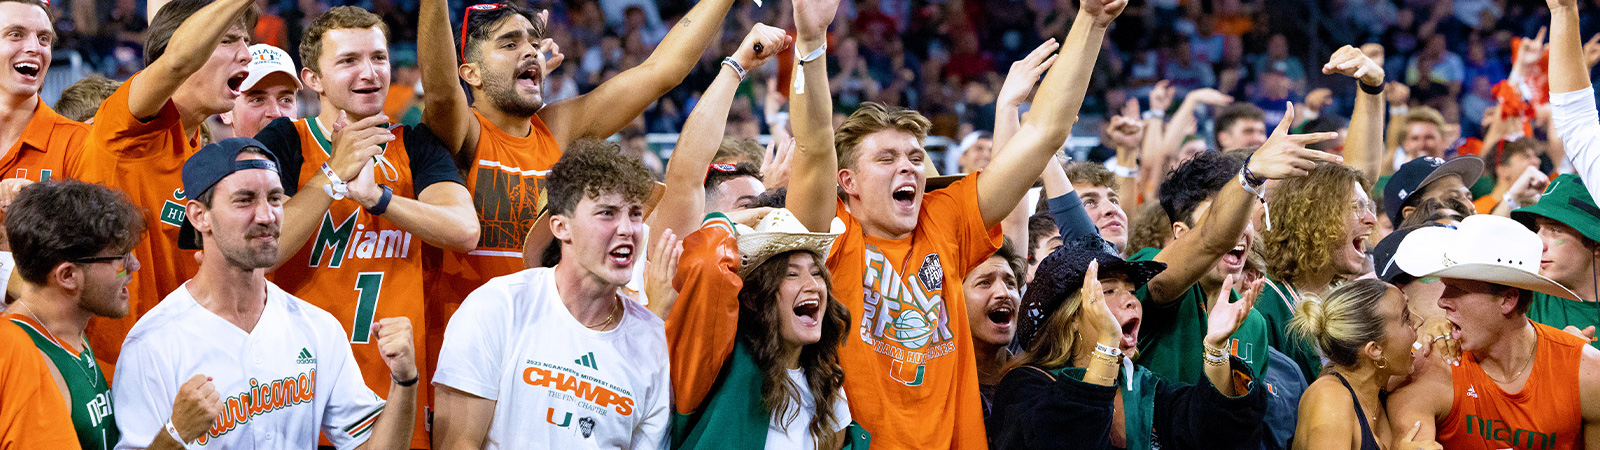 University of Miami basketball fans at the Final Four